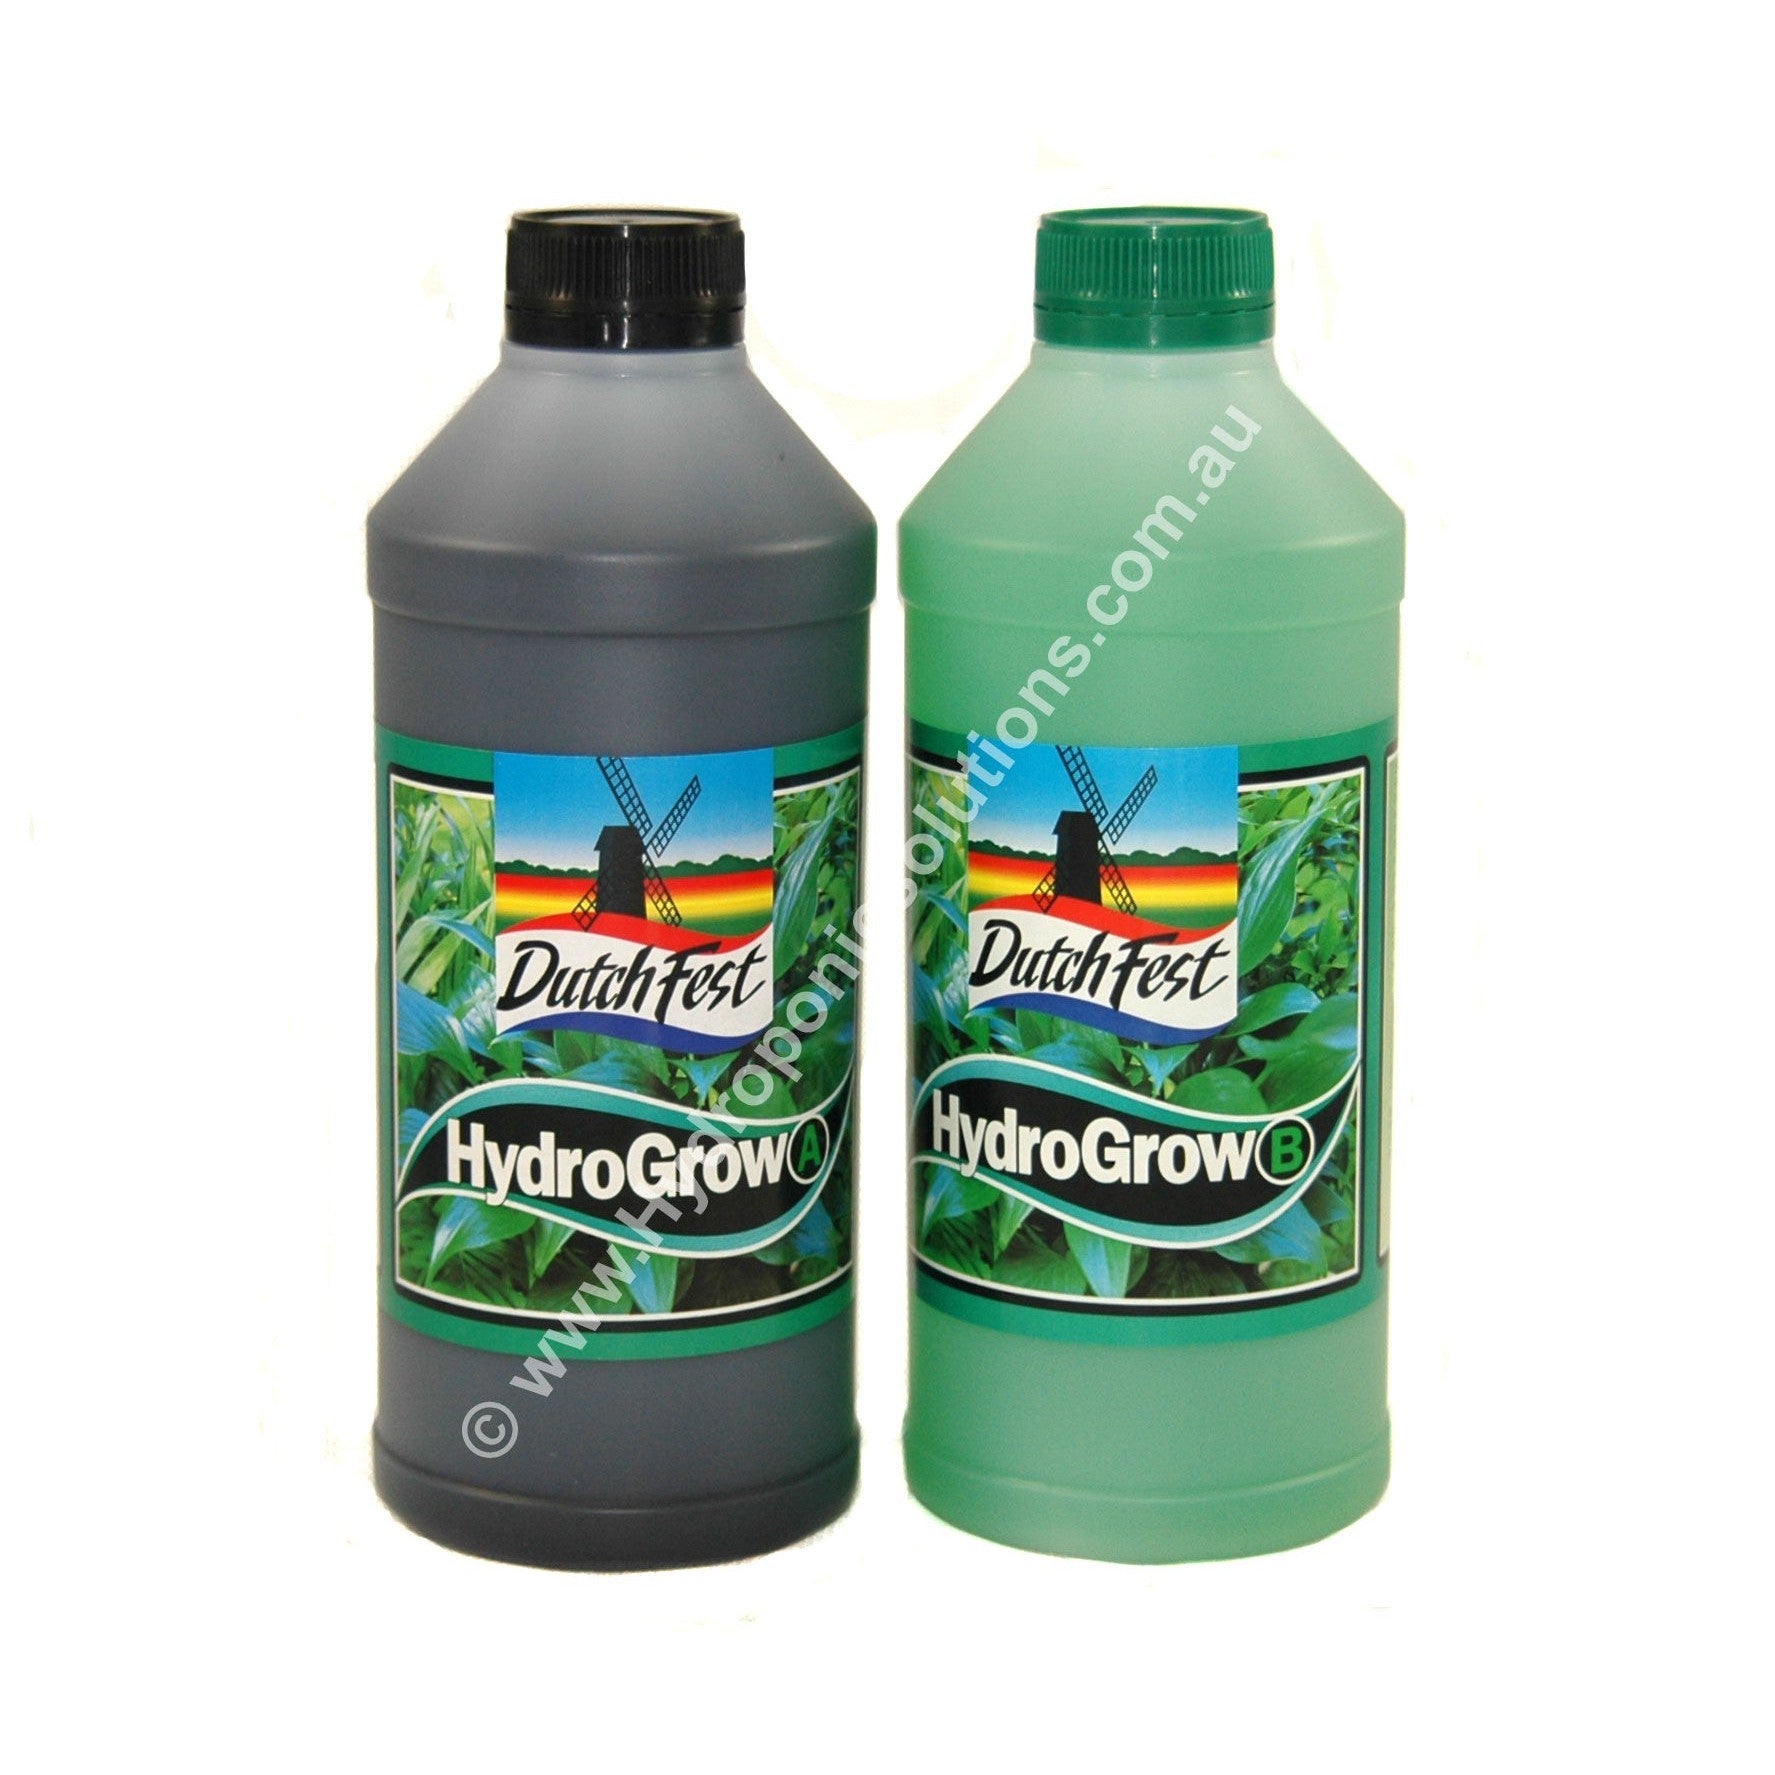 Dutch Fest HydroGrow Hydroponic Grow Nutrient Concentrate - Hydroponic Solutions